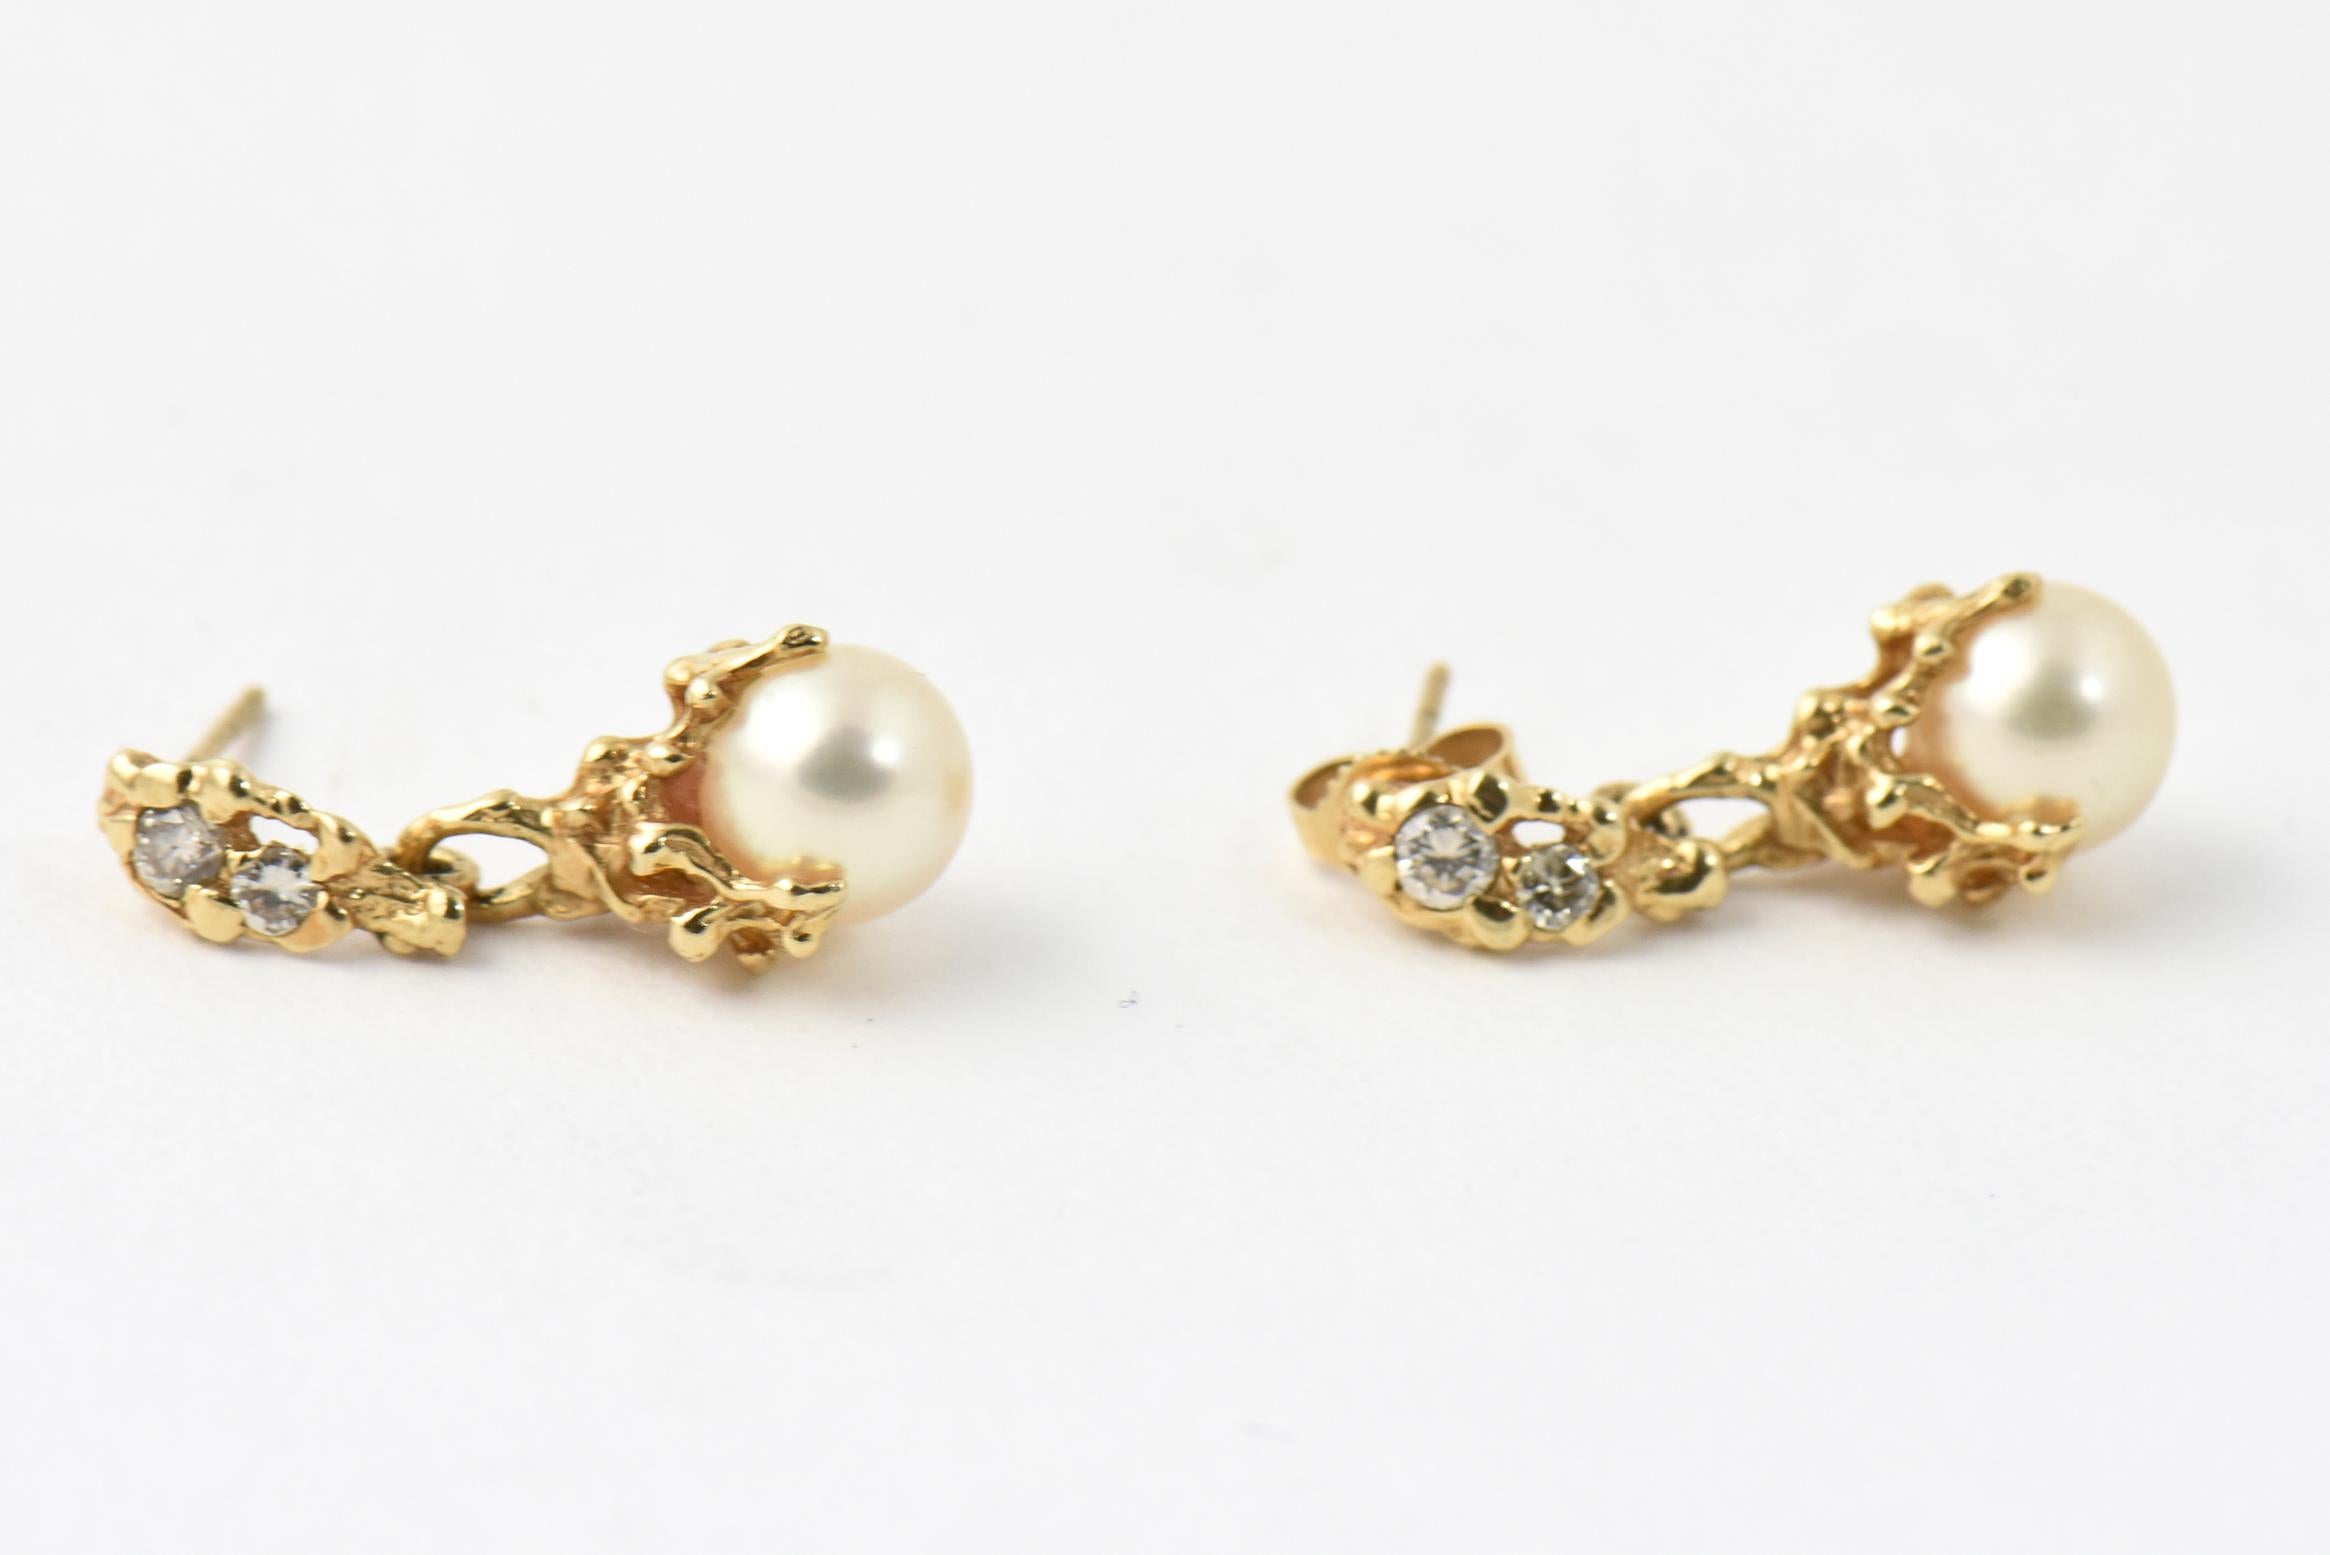 7.4 mm cultured pearls dangling from a 1960s - 1970s melted gold brutalist design. The top section has 2 diamonds in each one that are approximately .20 carats total diamond weight. Post earrings with a pair of push on backs.